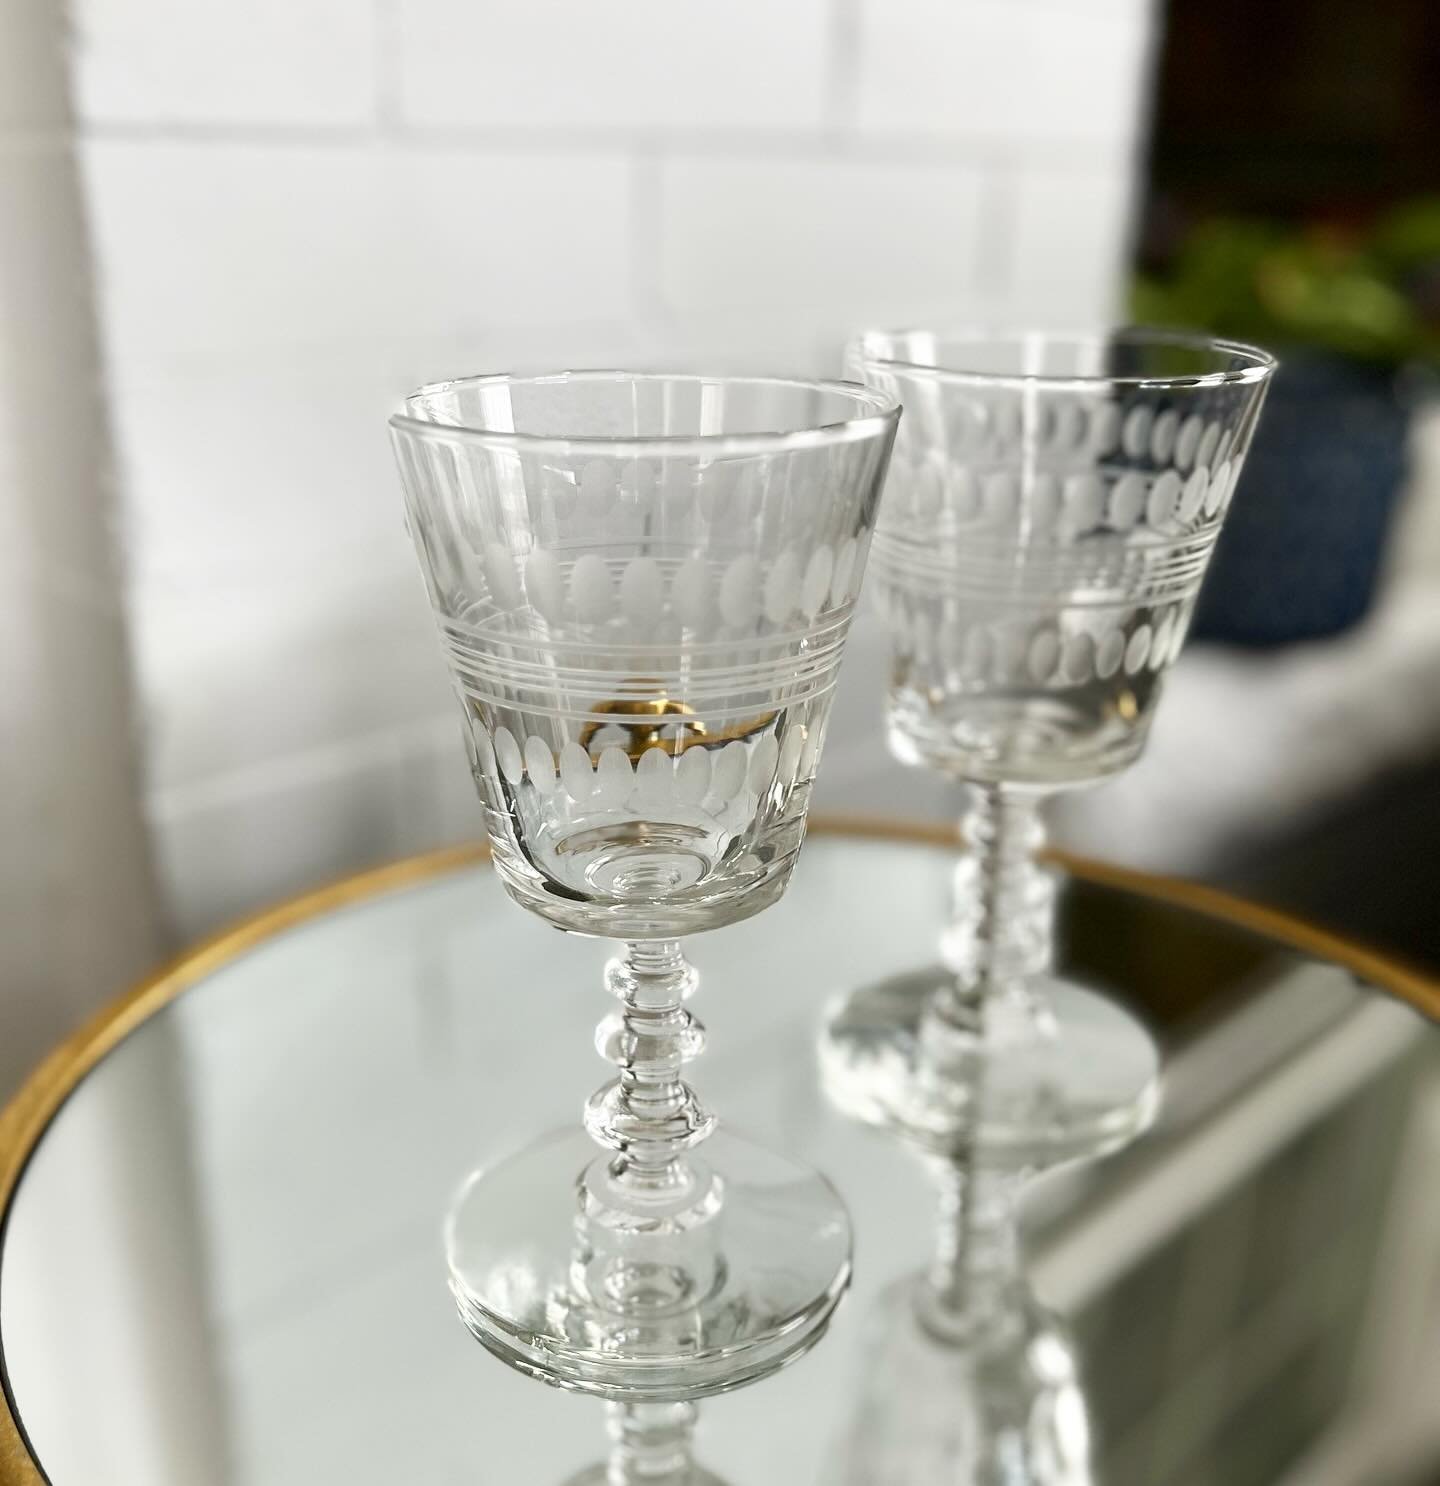 More lovely Libbey Glassware! These Cocktail Glasses with oval etched design are adorable! 

Condition: Excellent! Available in sets of 4 for $48.

- Comment SOLD on item or DM to purchase. 
- Venmo and Square are accepted
- Free local pickup availab